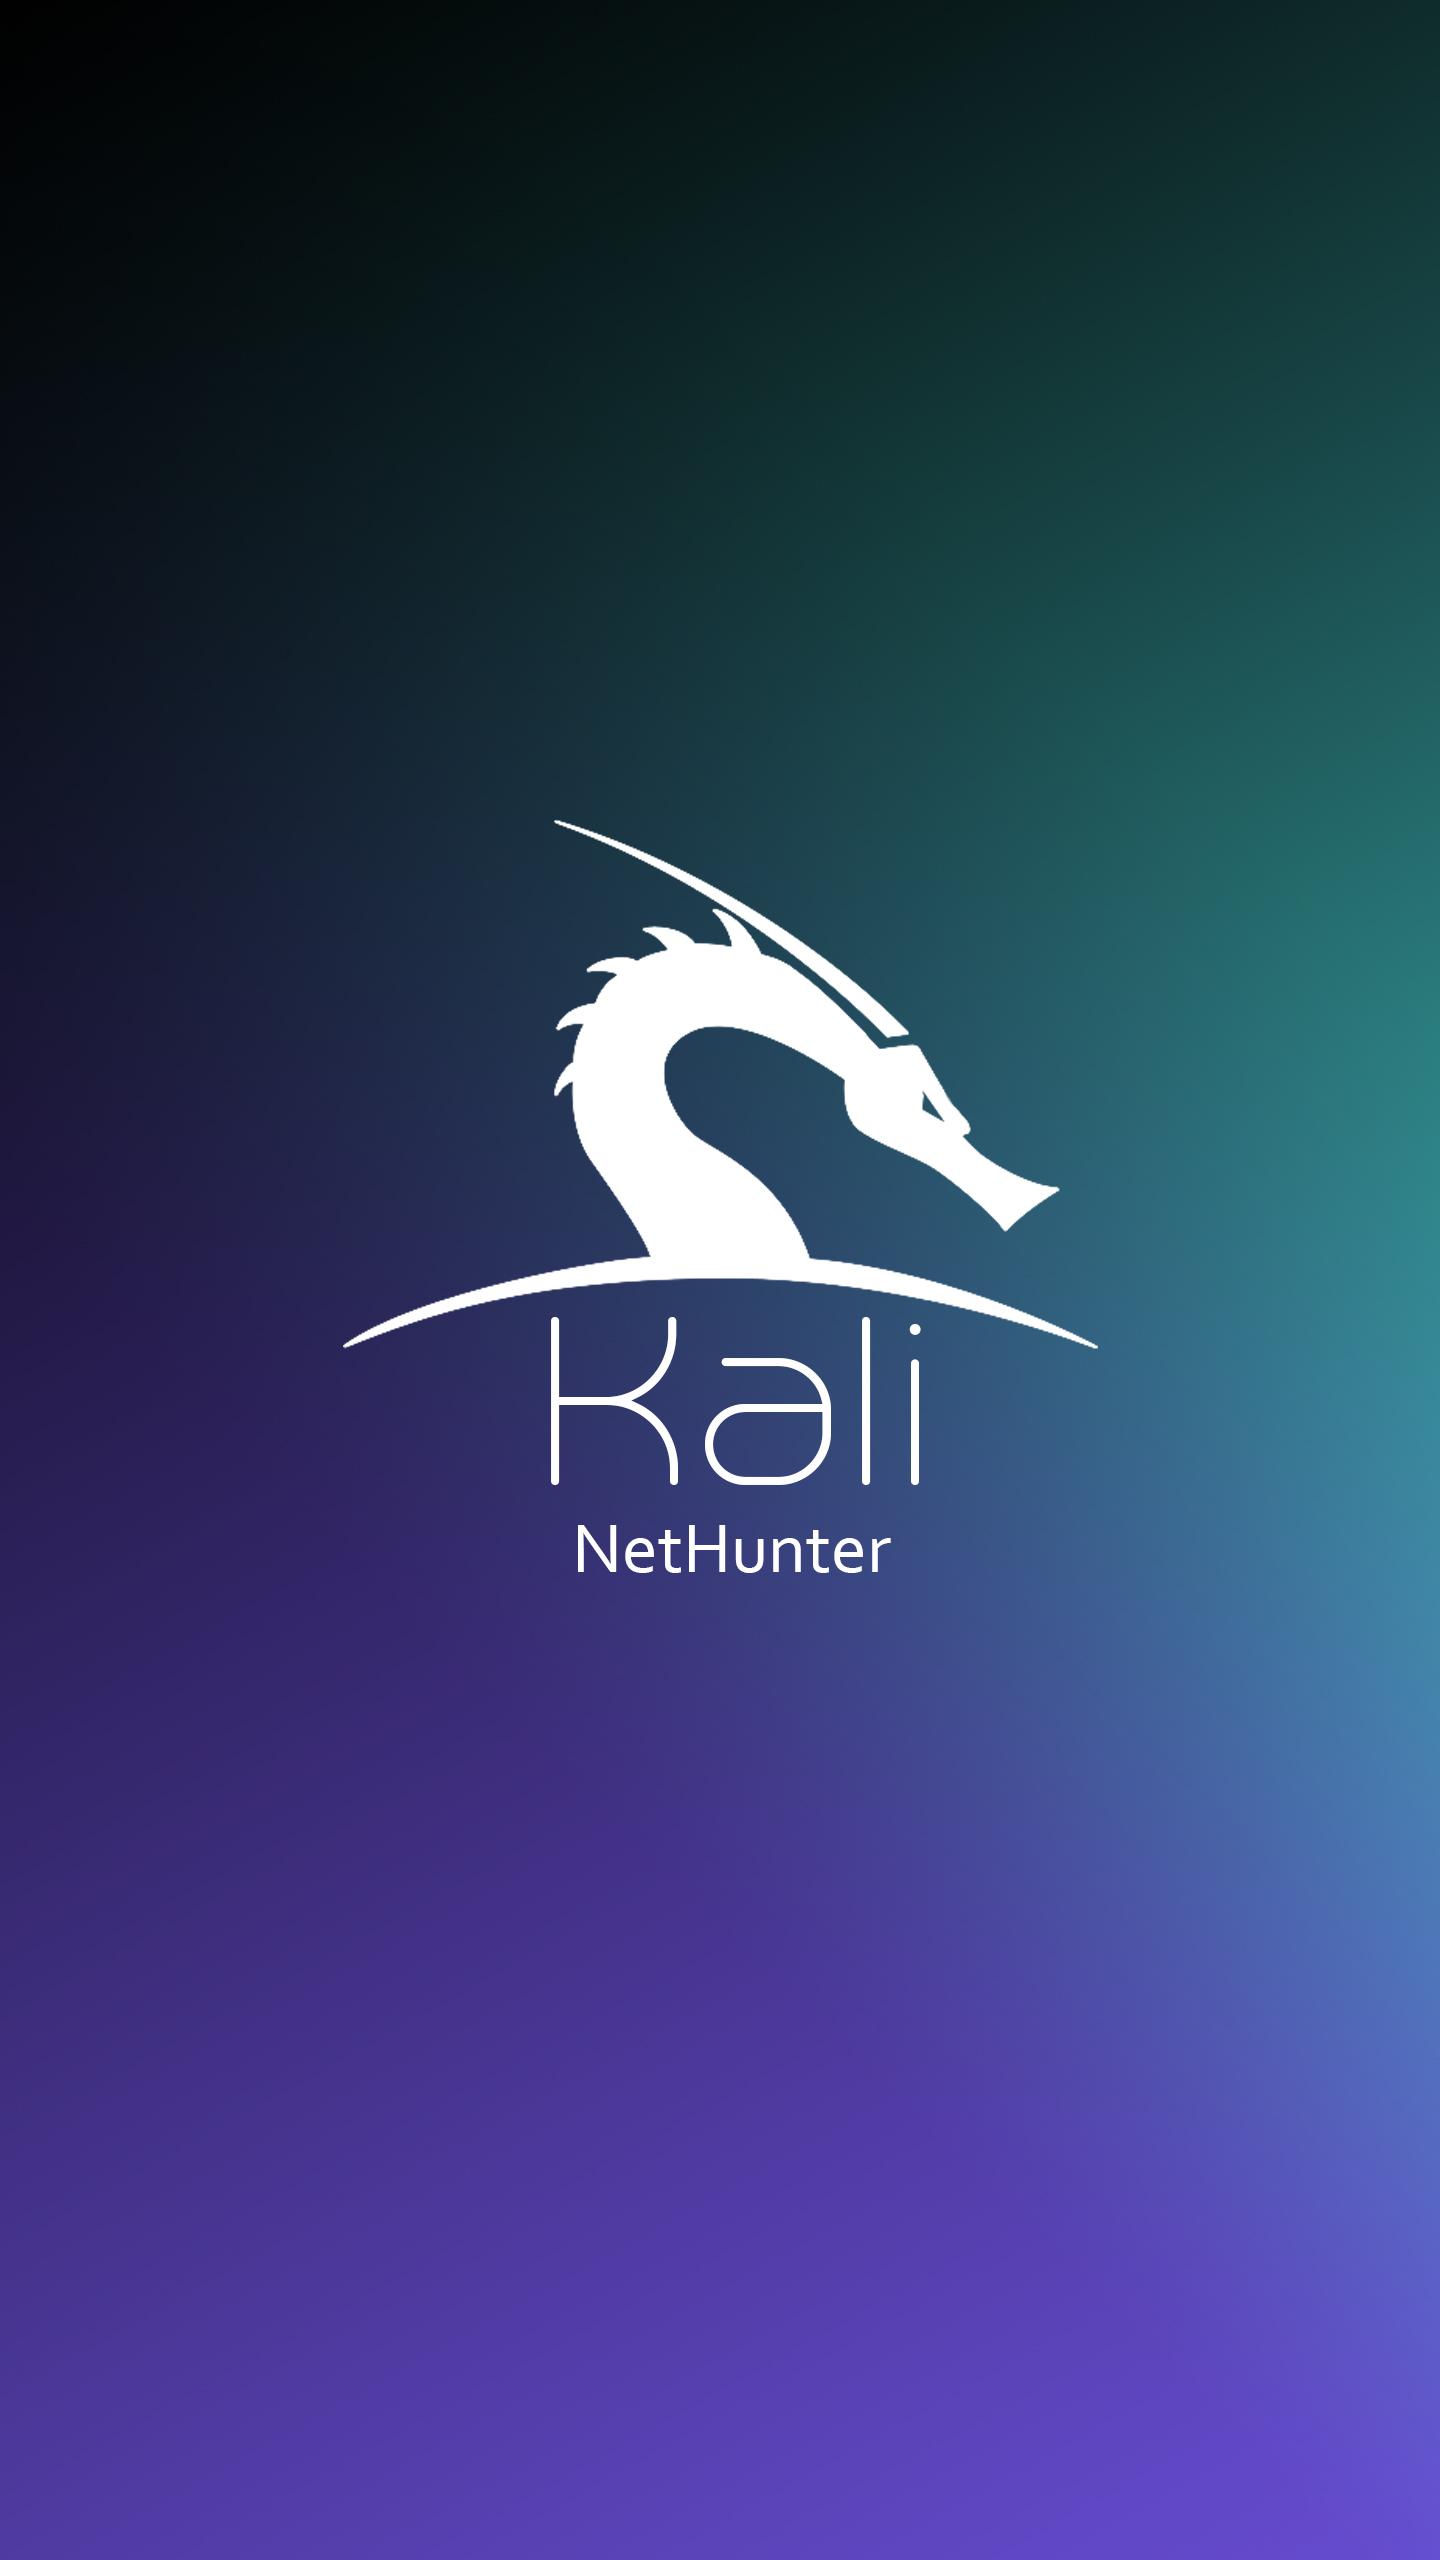 Add Simpler Wallpaper · Issue · Offensive Security Kali Nethunter · GitHub